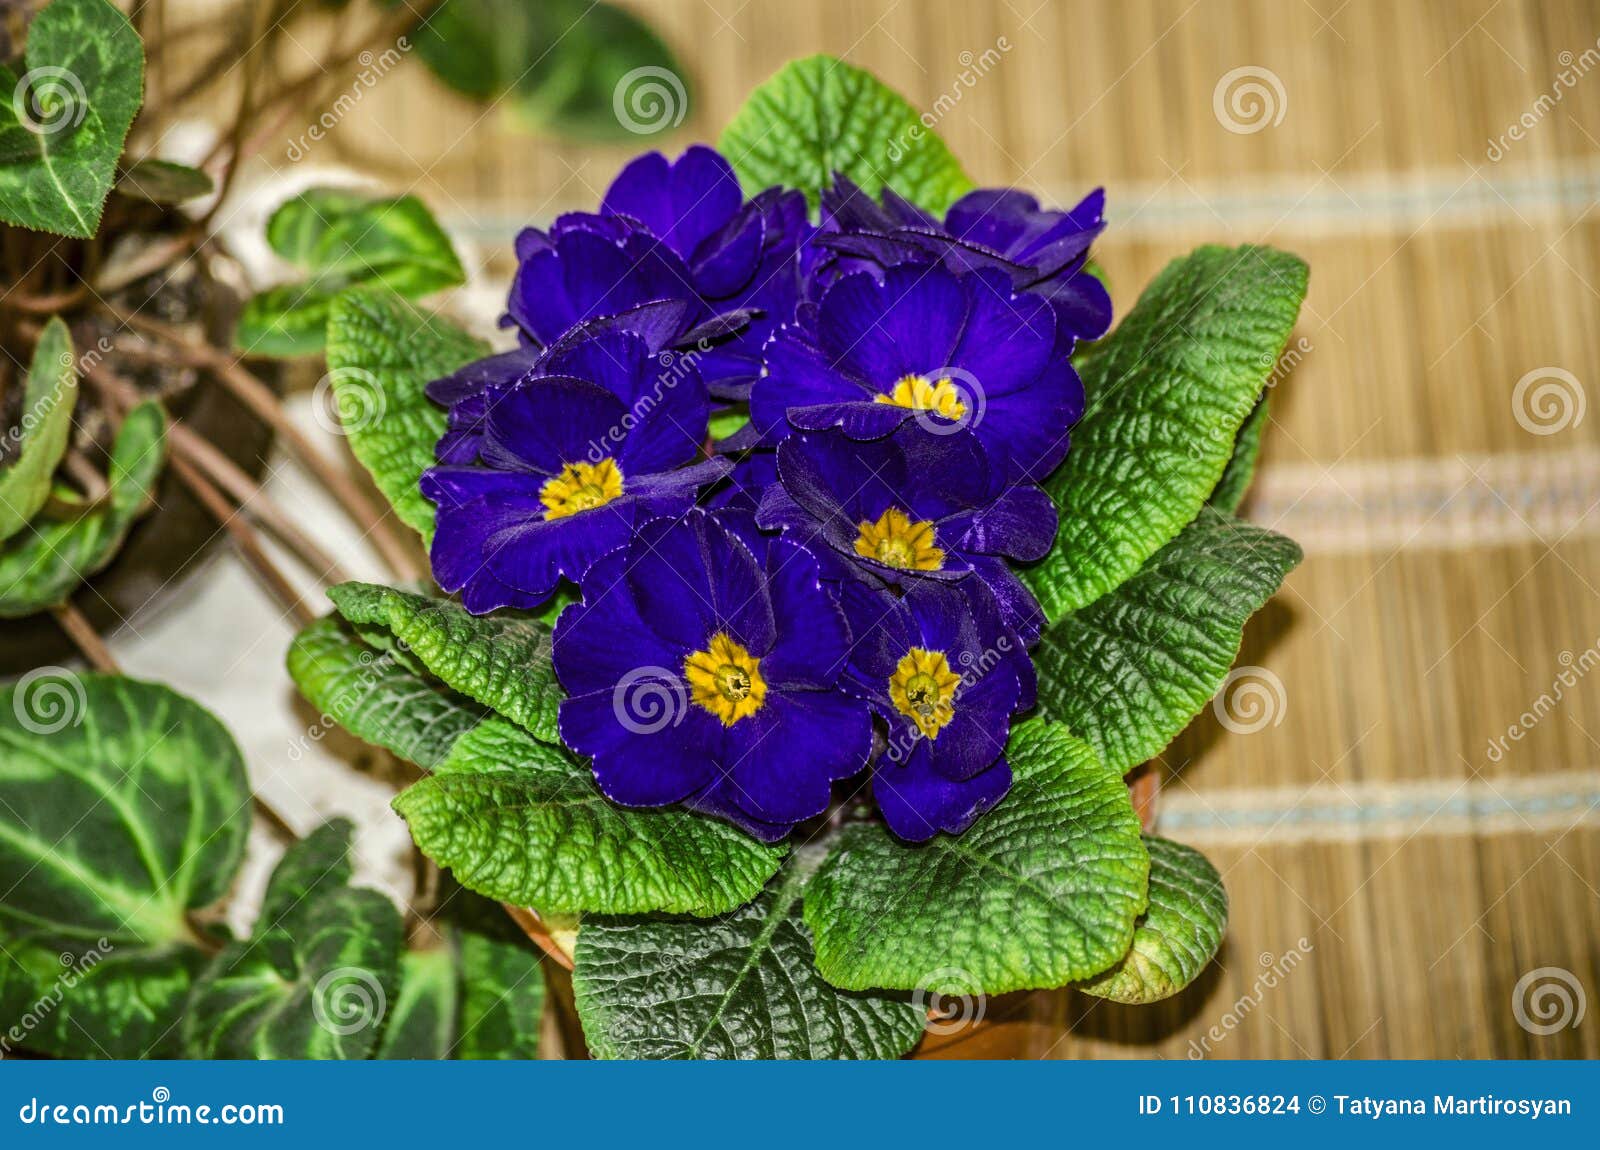 Purple flower with yellow center indoor plant